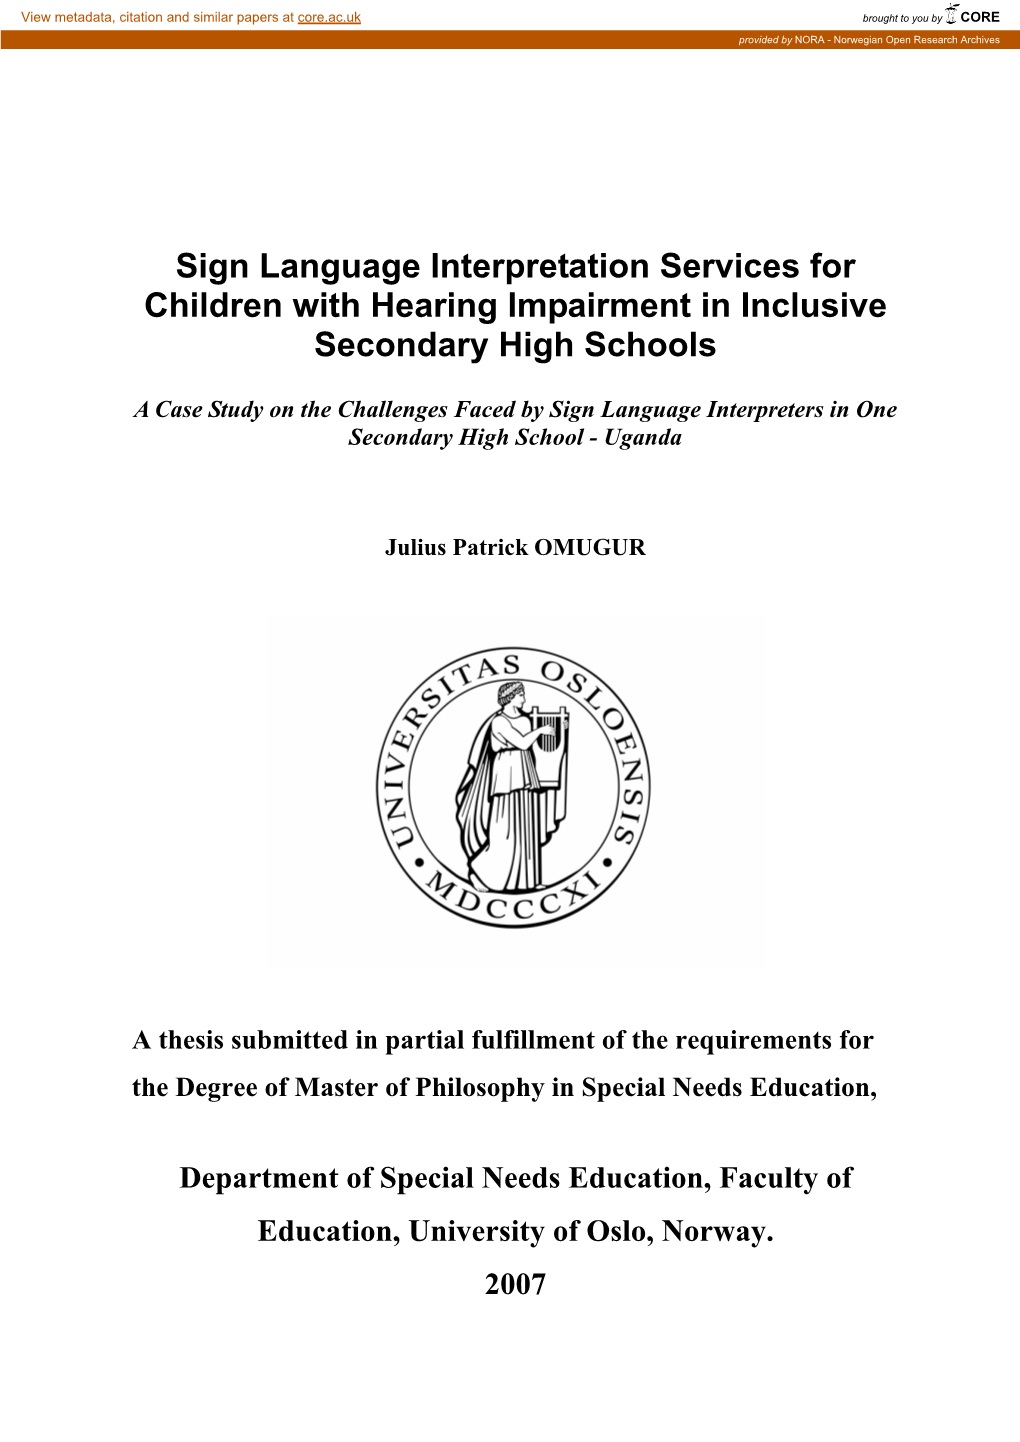 Sign Language Interpretation Services for Children with Hearing Impairment in Inclusive Secondary High Schools